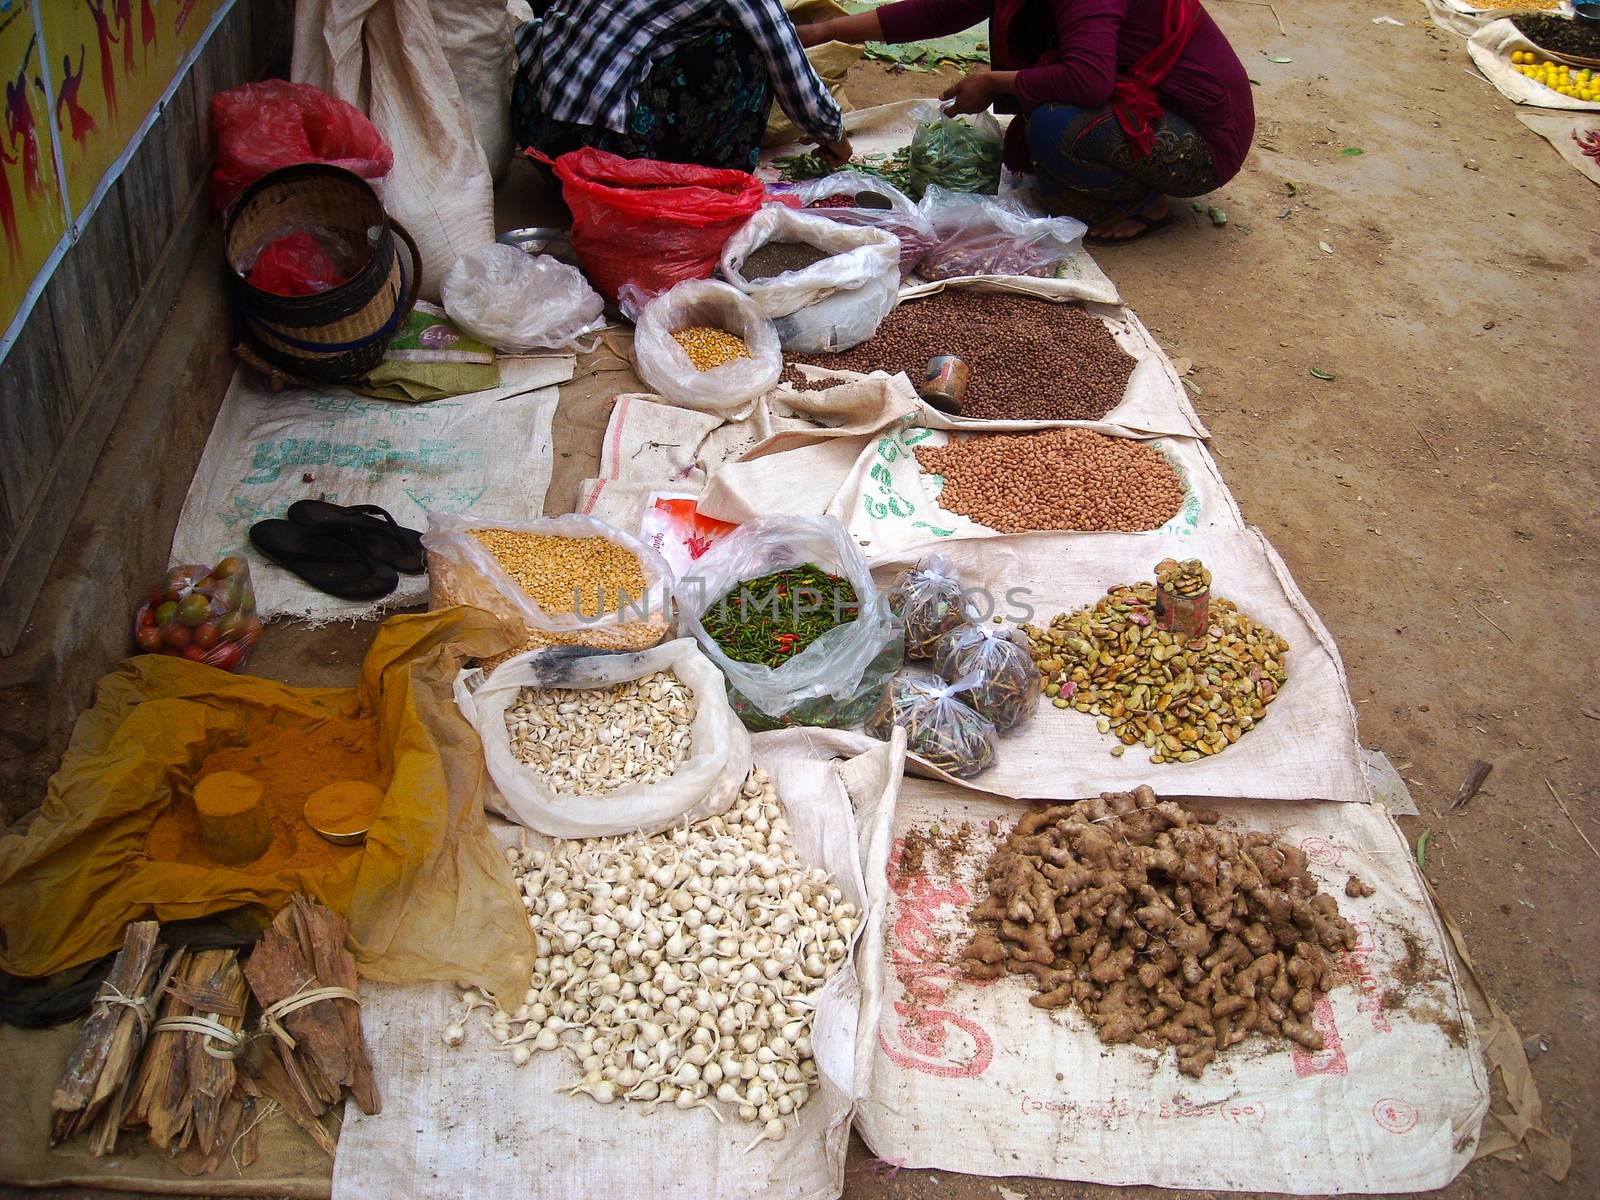 rice and beans in a market in burma by Tevion25